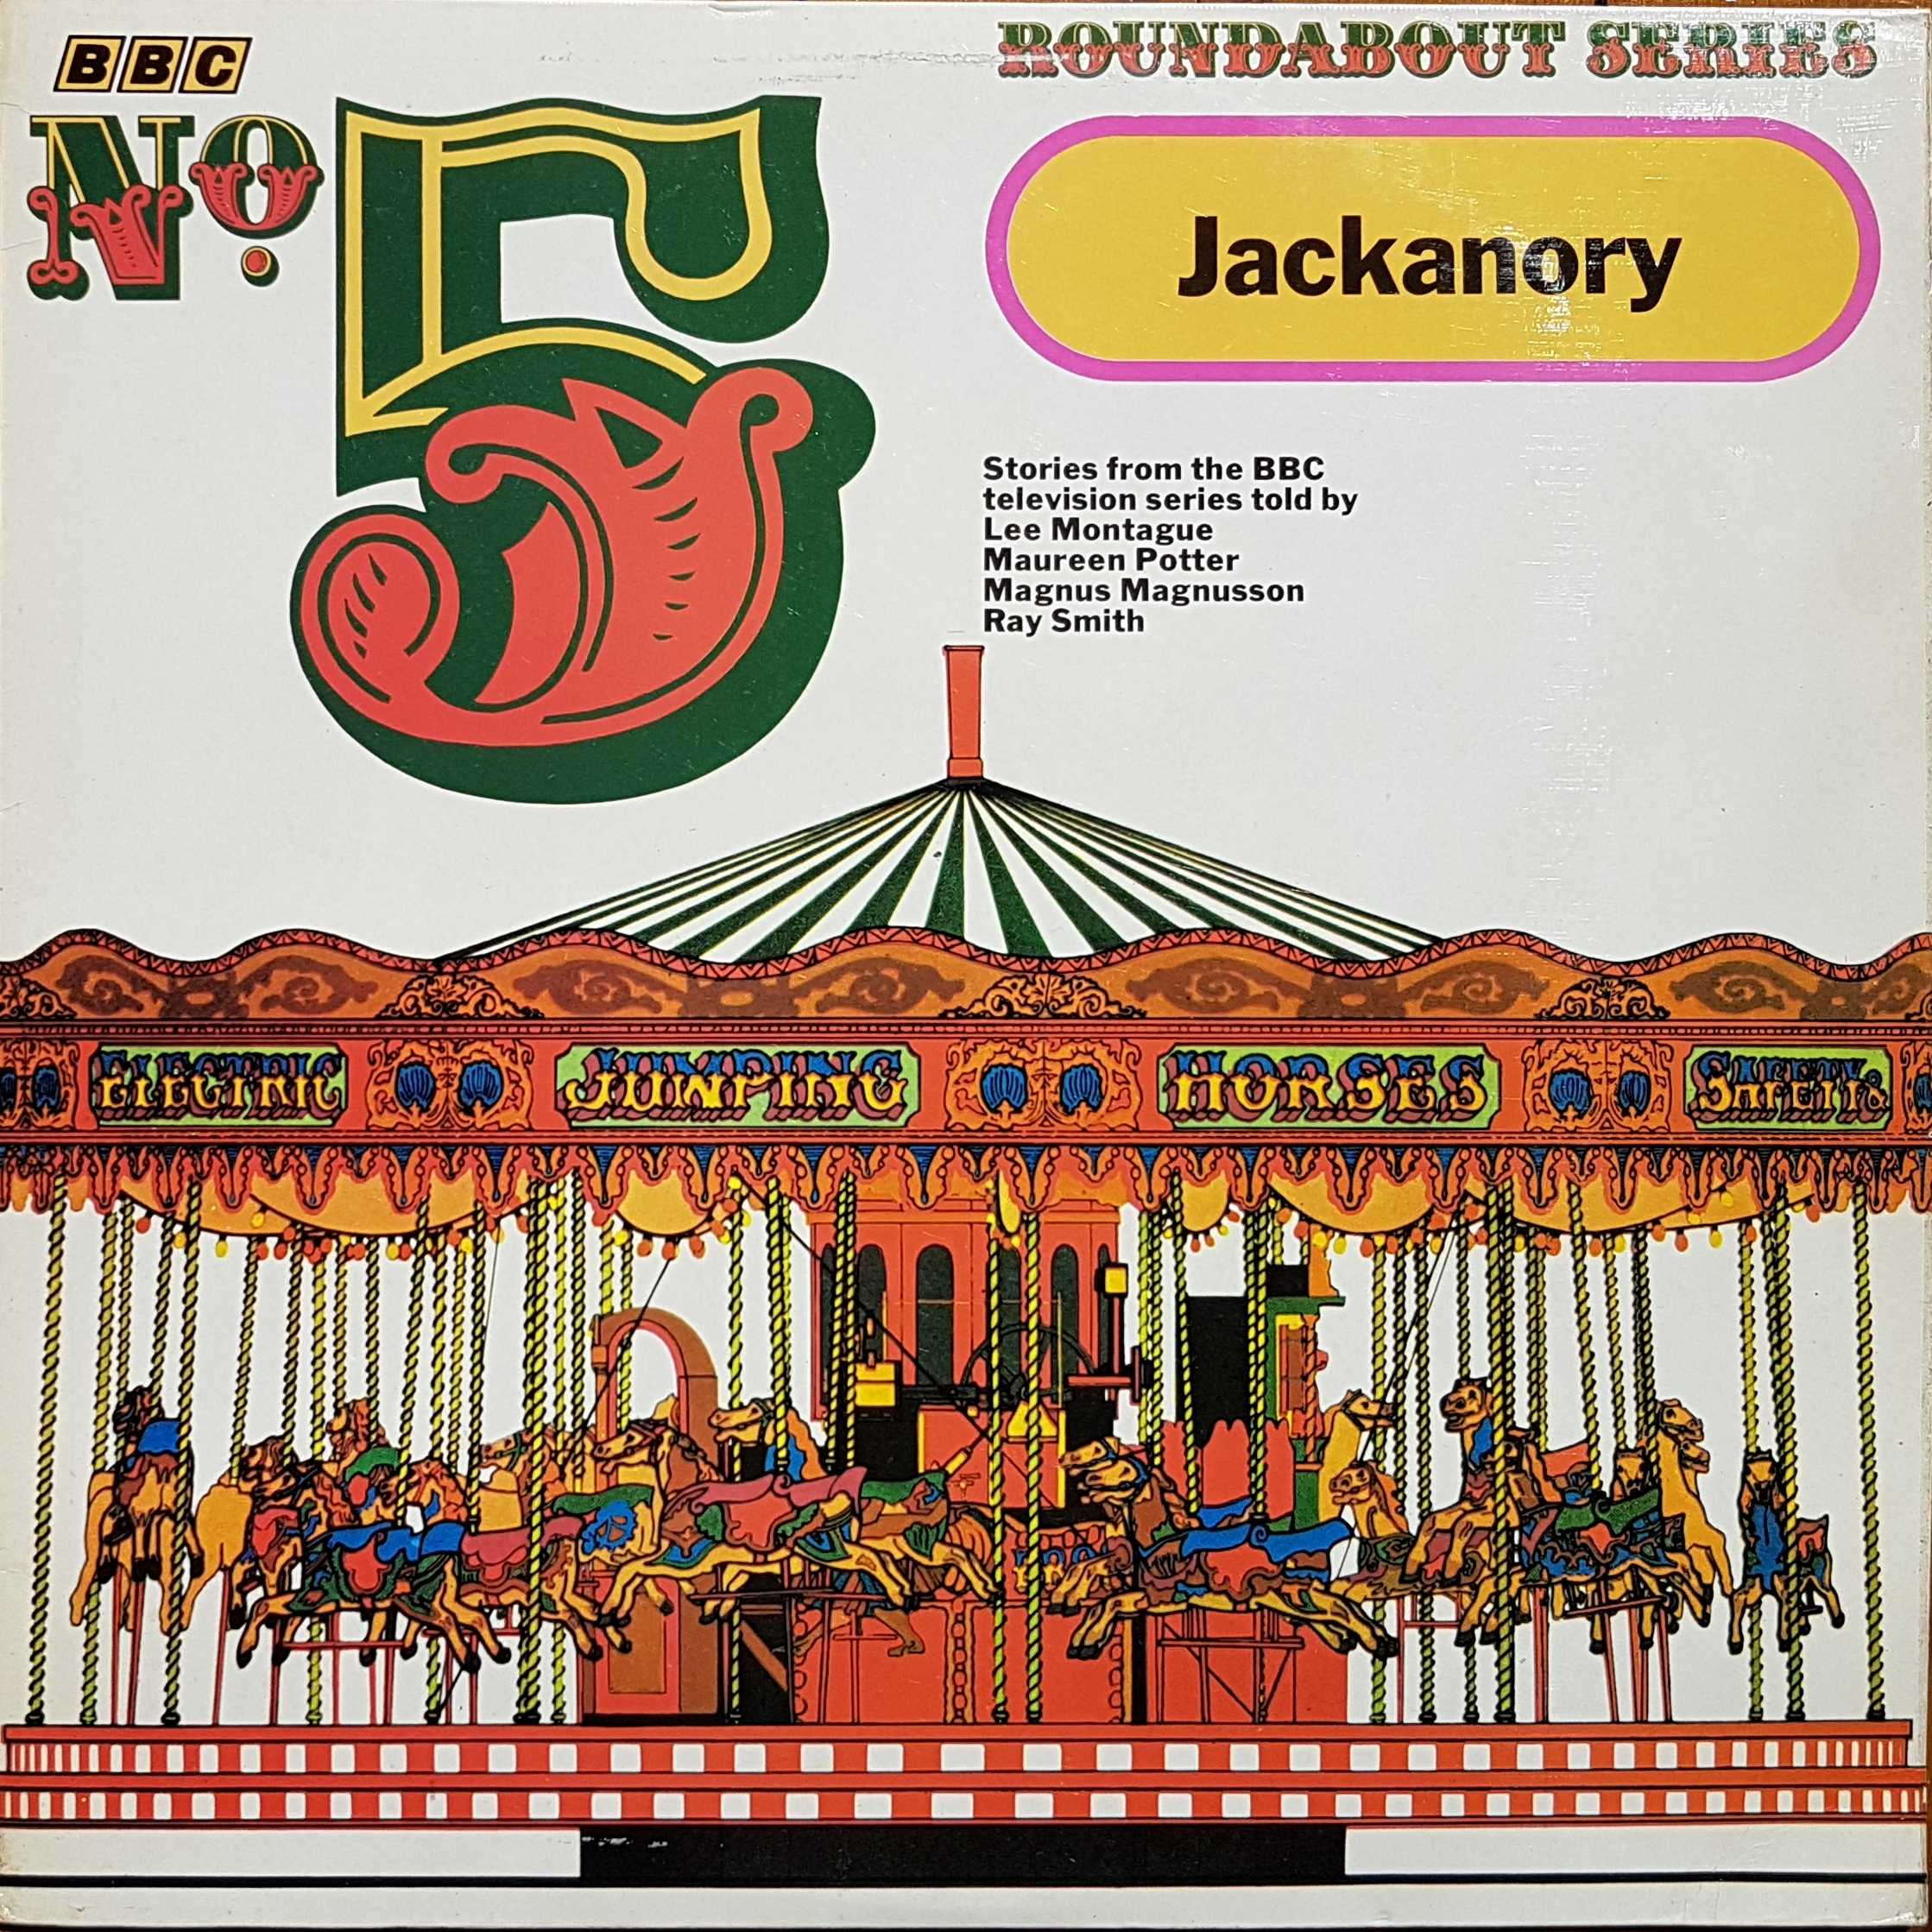 Picture of RBT 5 Jackanory by artist Lee Montague / Maureen Potter / Magnus Magnusson / Ray Smith from the BBC albums - Records and Tapes library